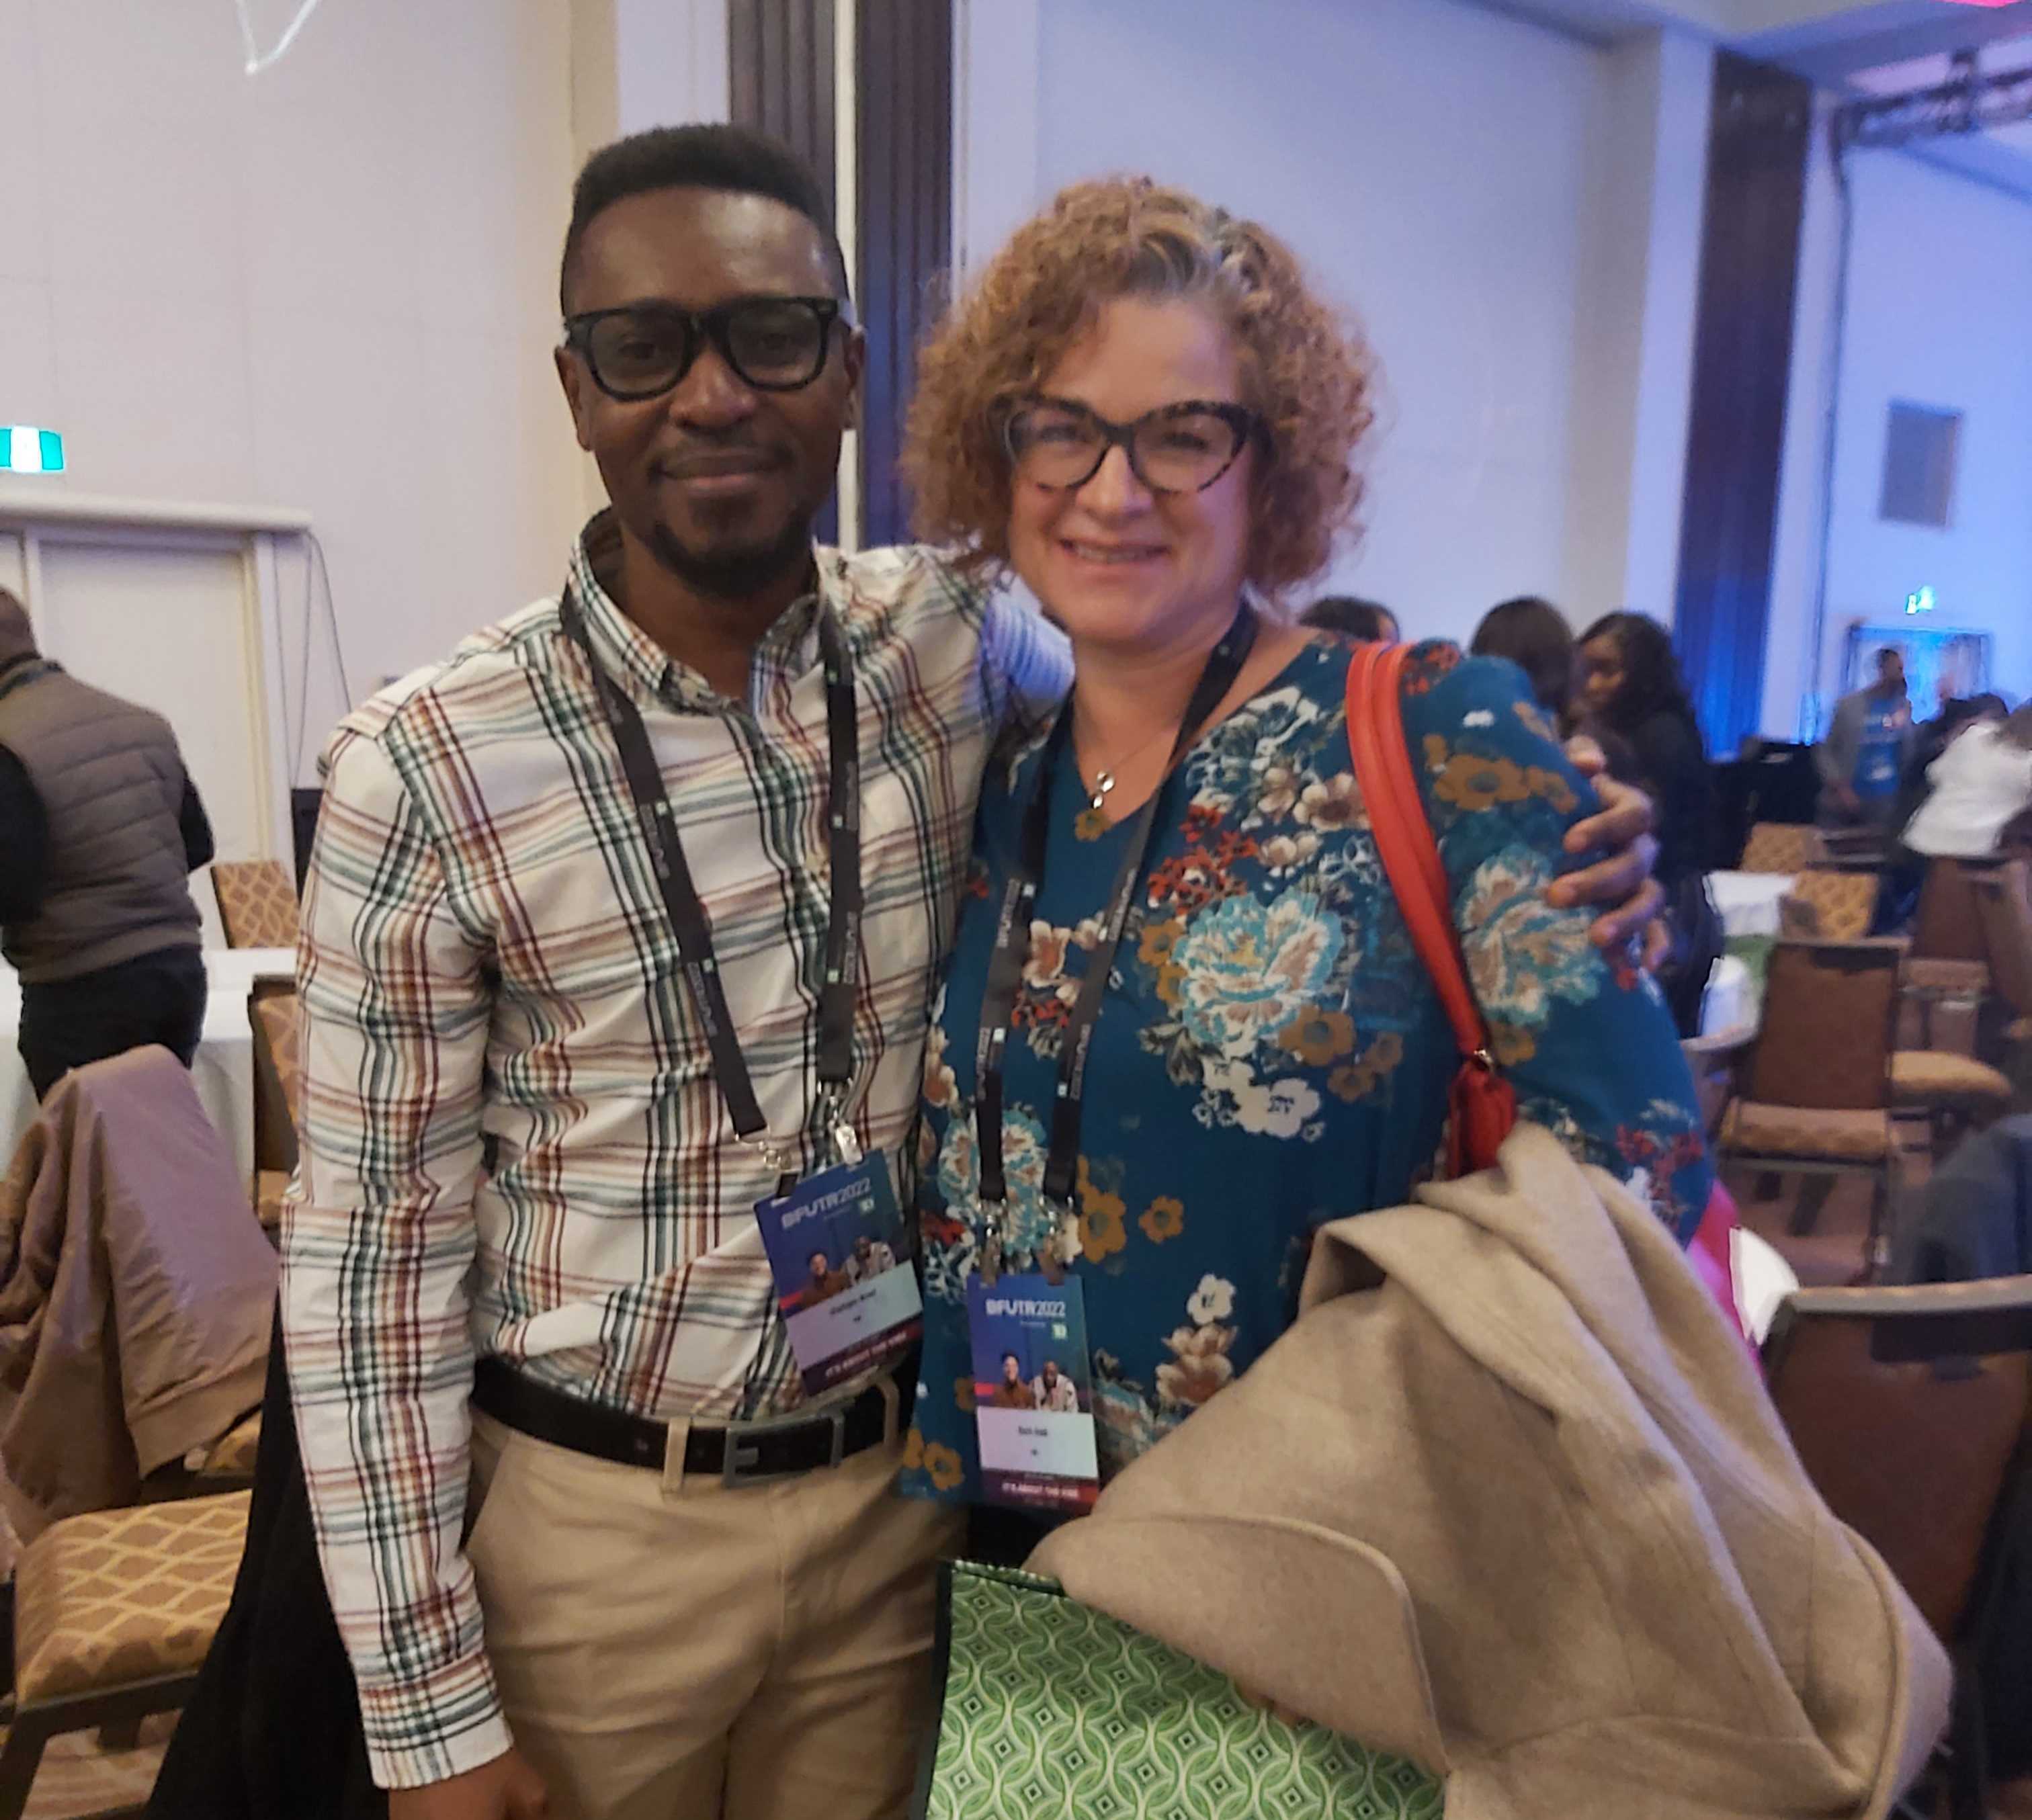 Two black team members pose together at a conference, both wearing lanyards